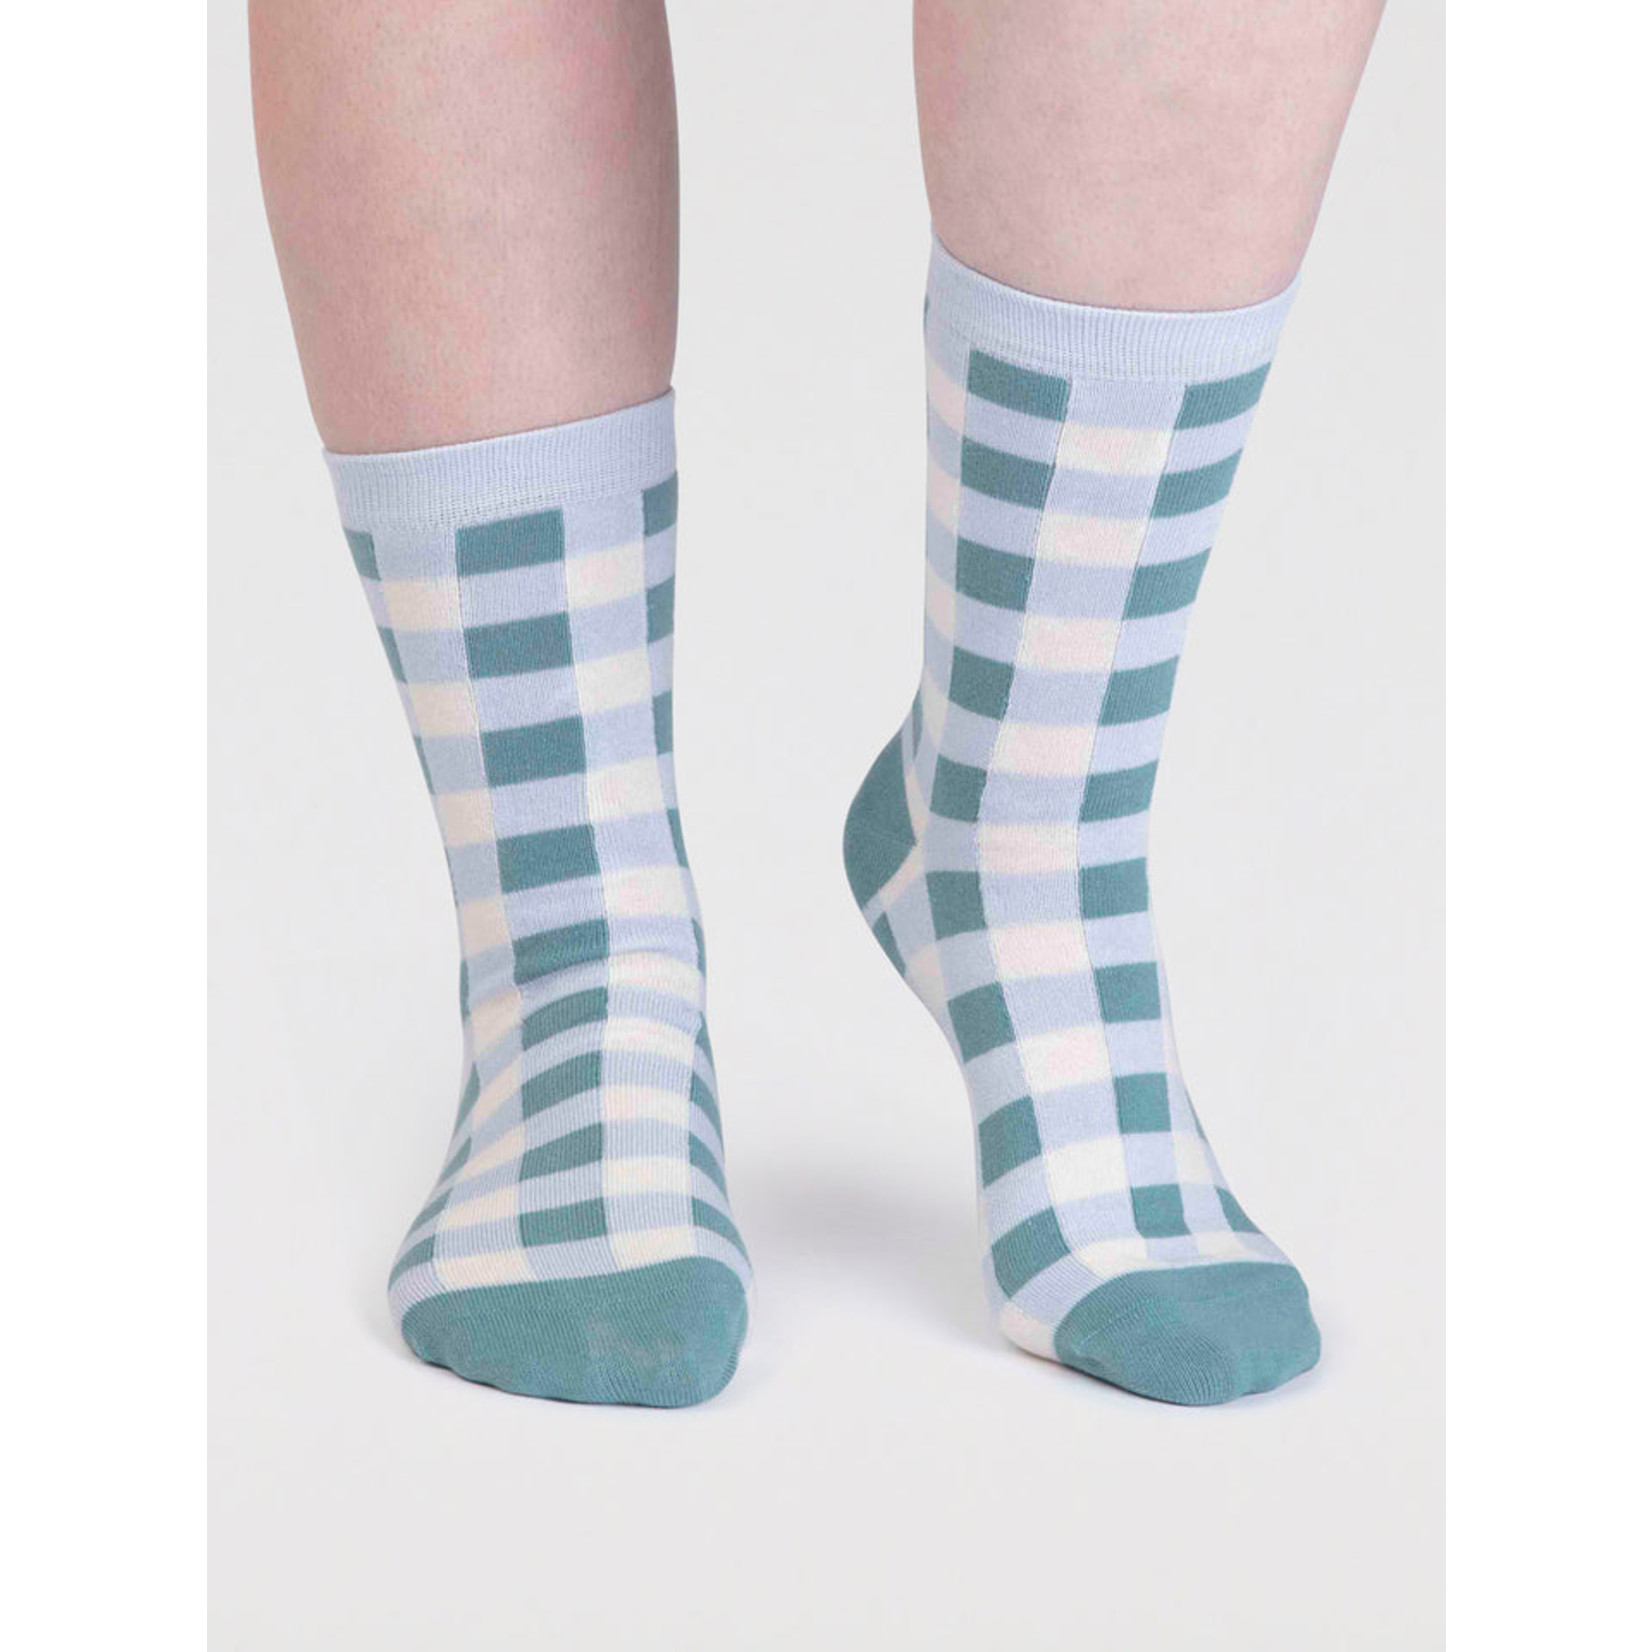 Thought Sale - Socks - Laie Check